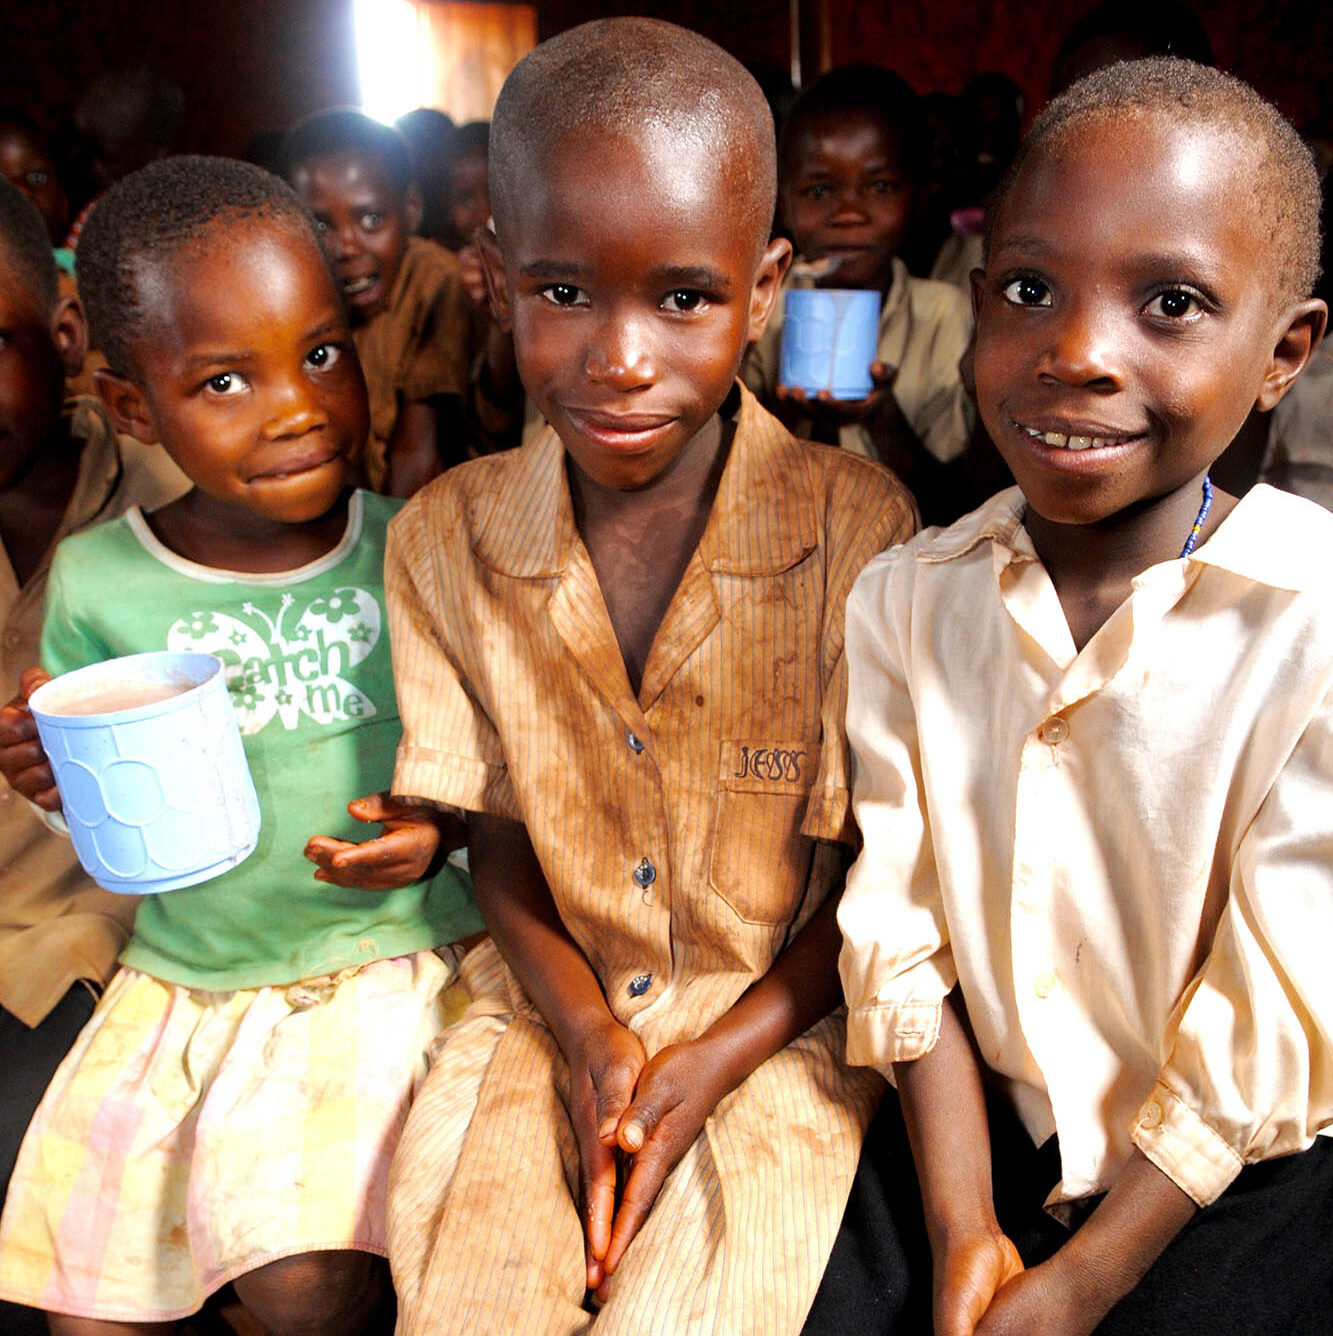 hree young children smiling for the camera in a community setting in Burundi